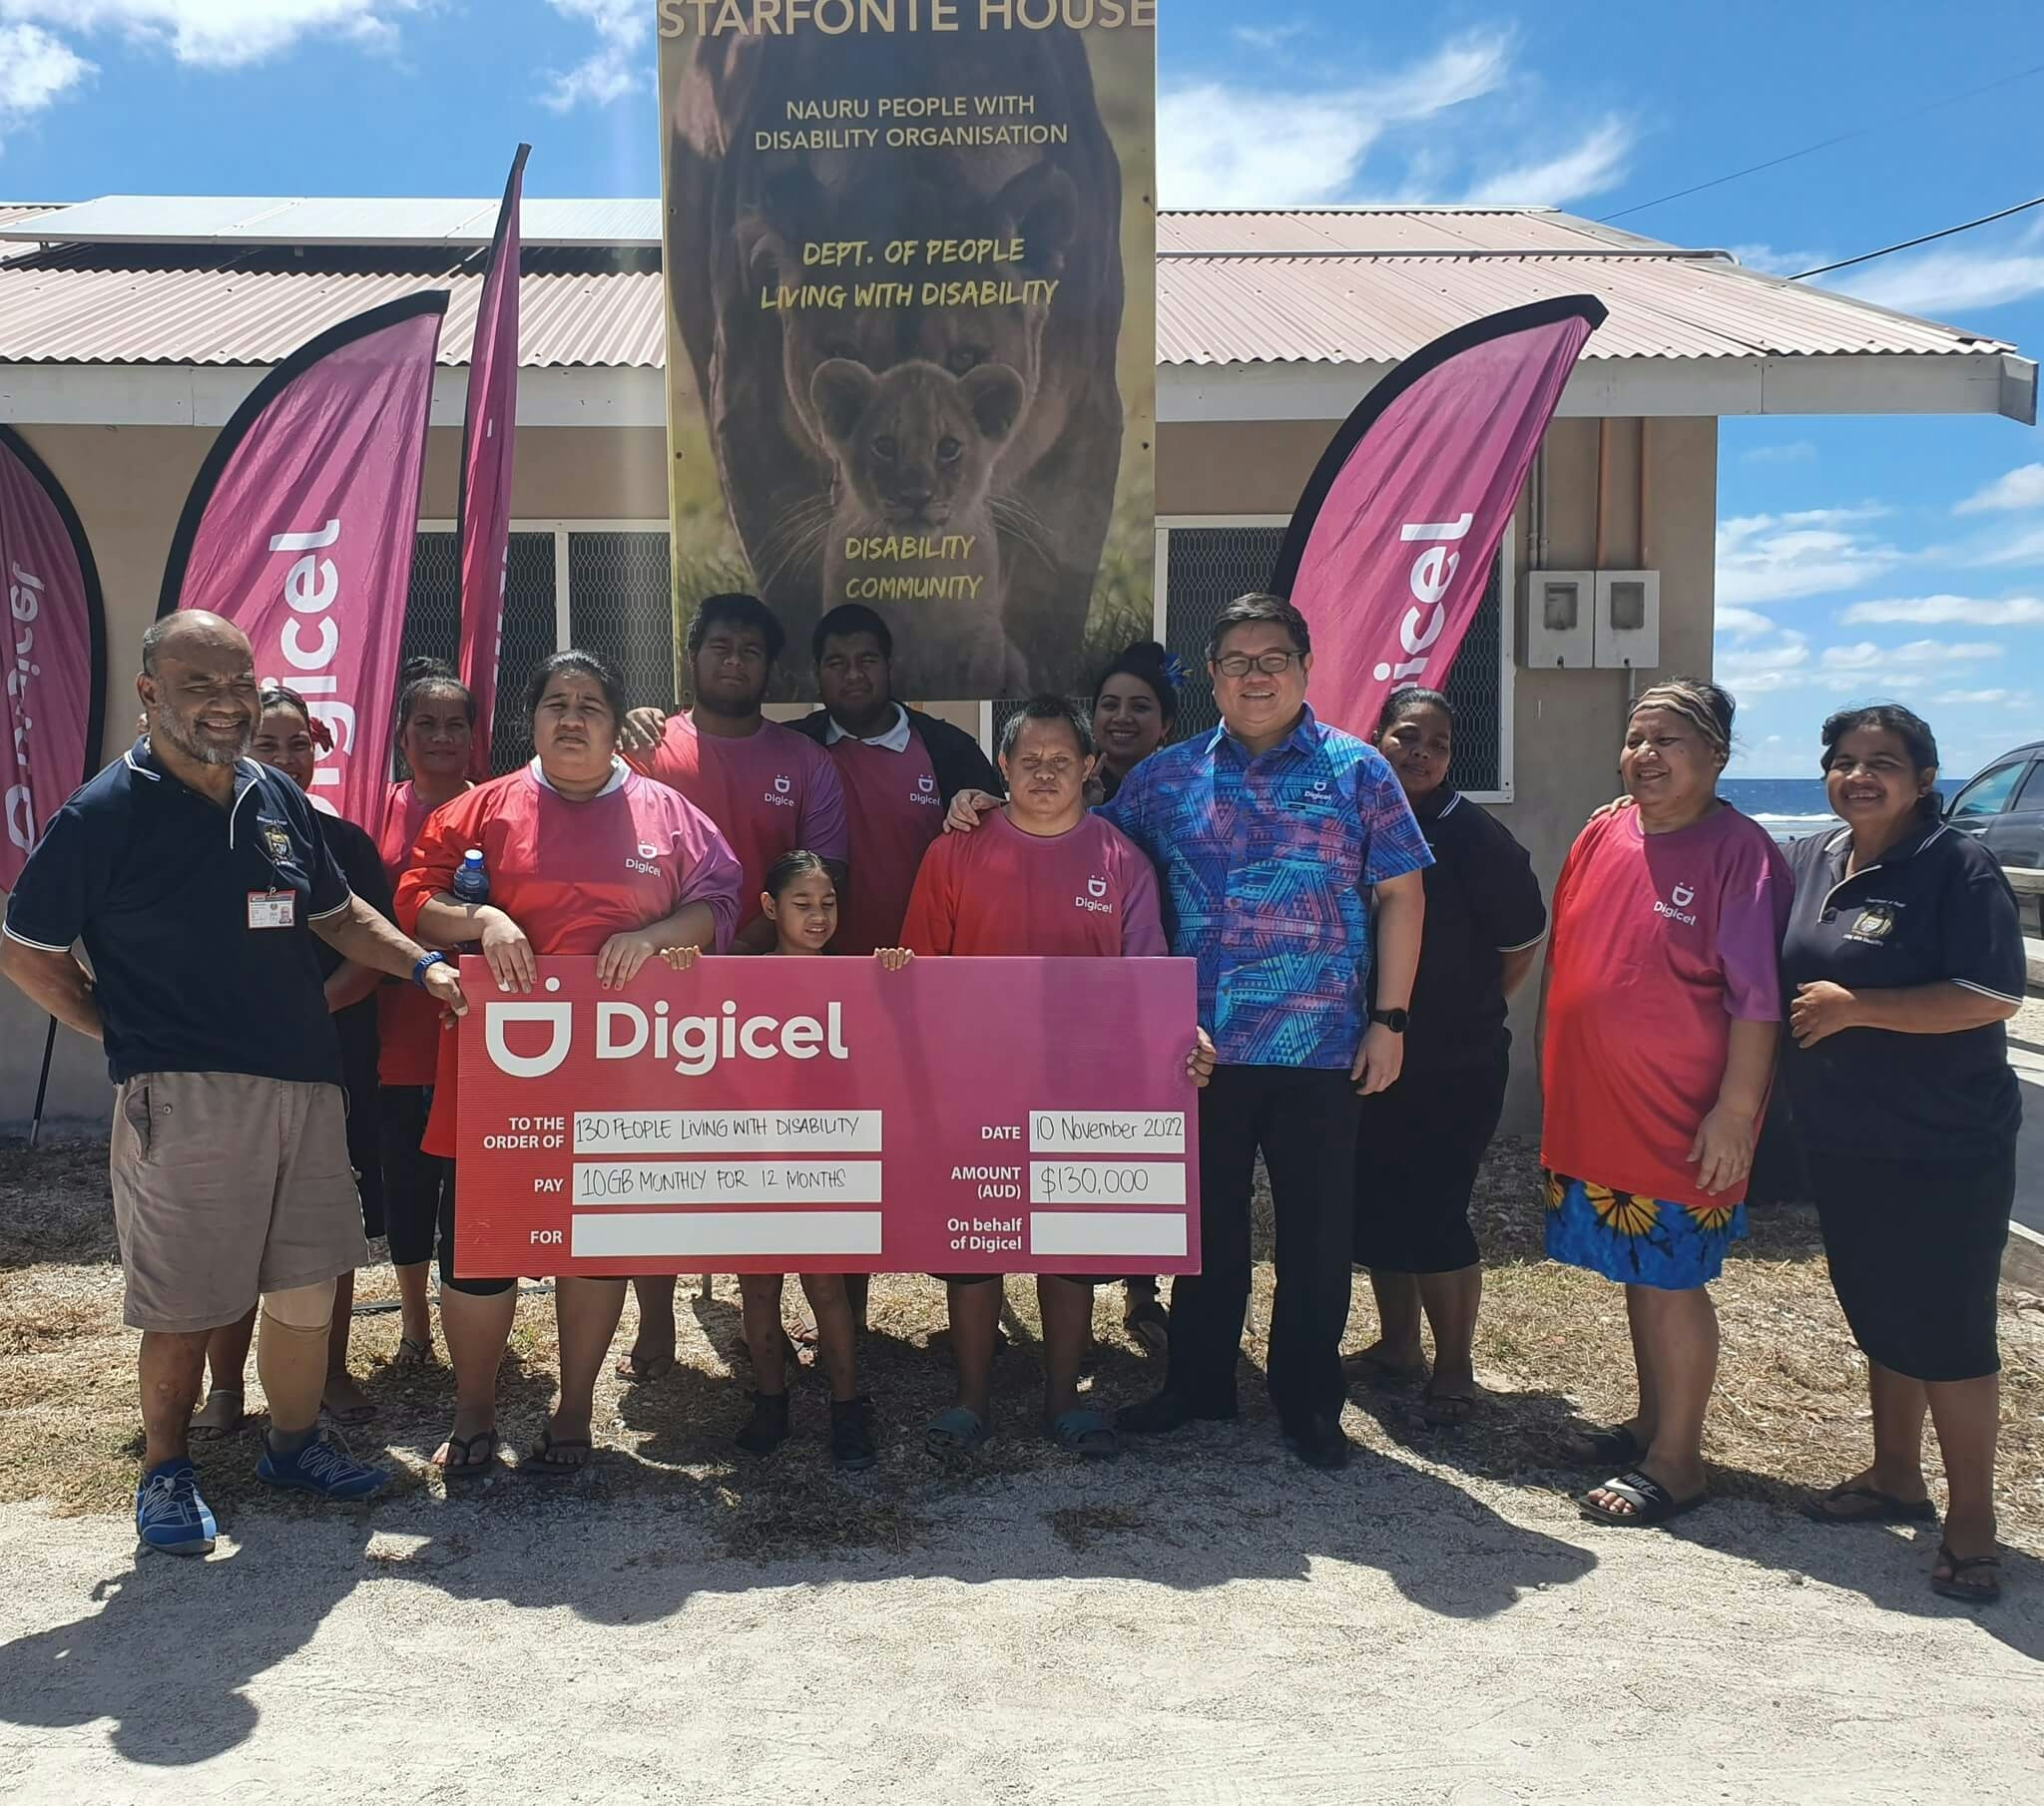 A group of staff from the Department of People Living with Disability staff and Digicel holding a check for $130,000 AUD